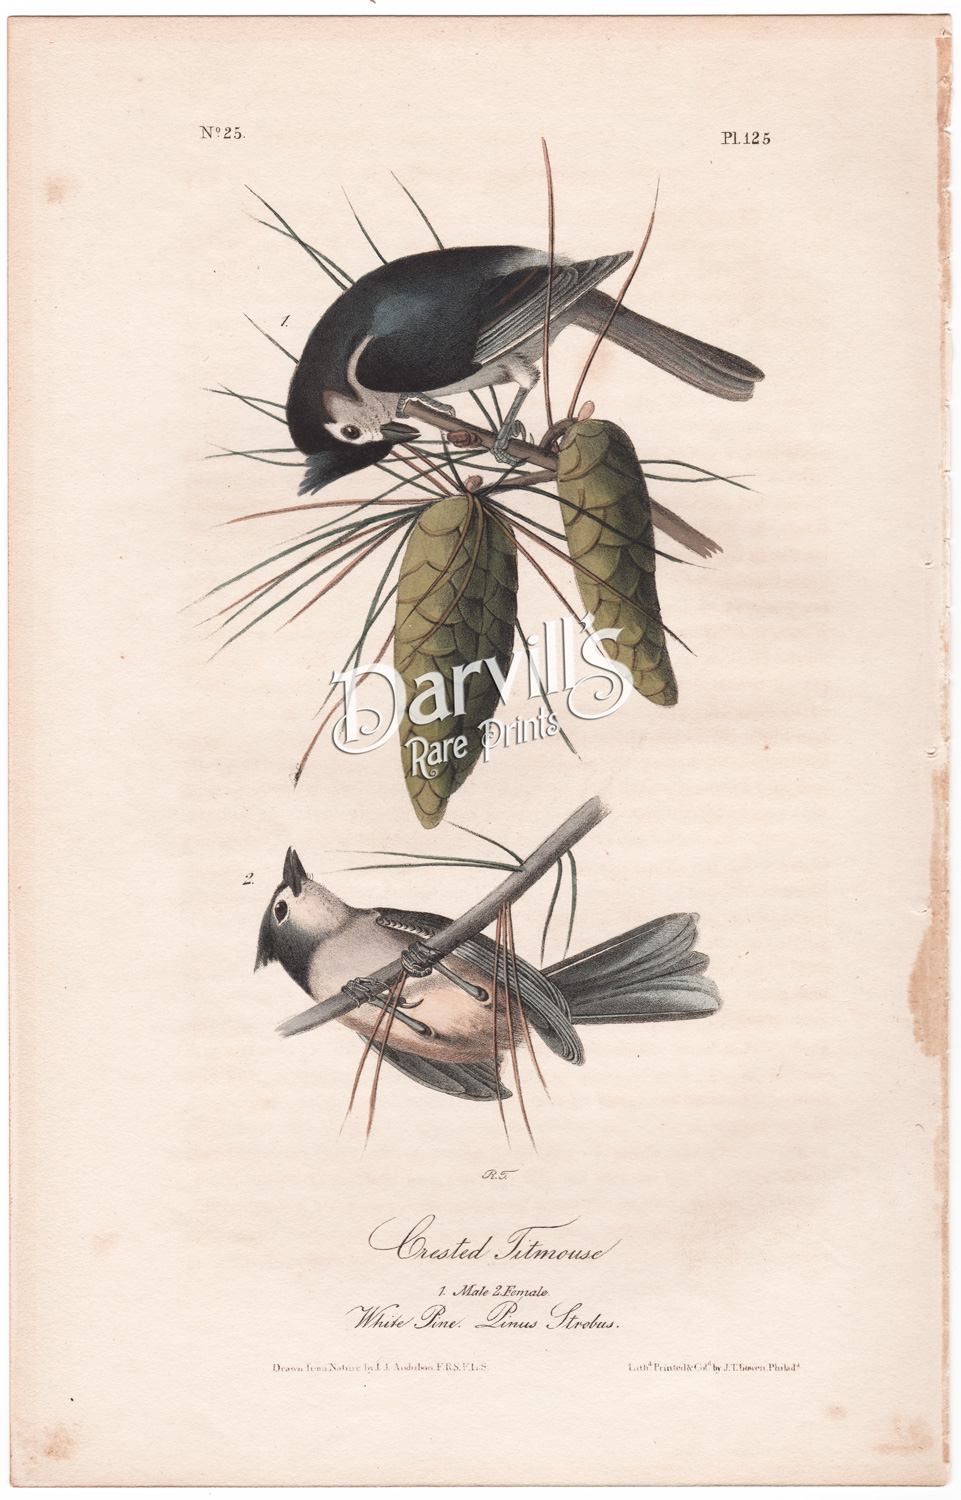 Crested Titmouse plate 125